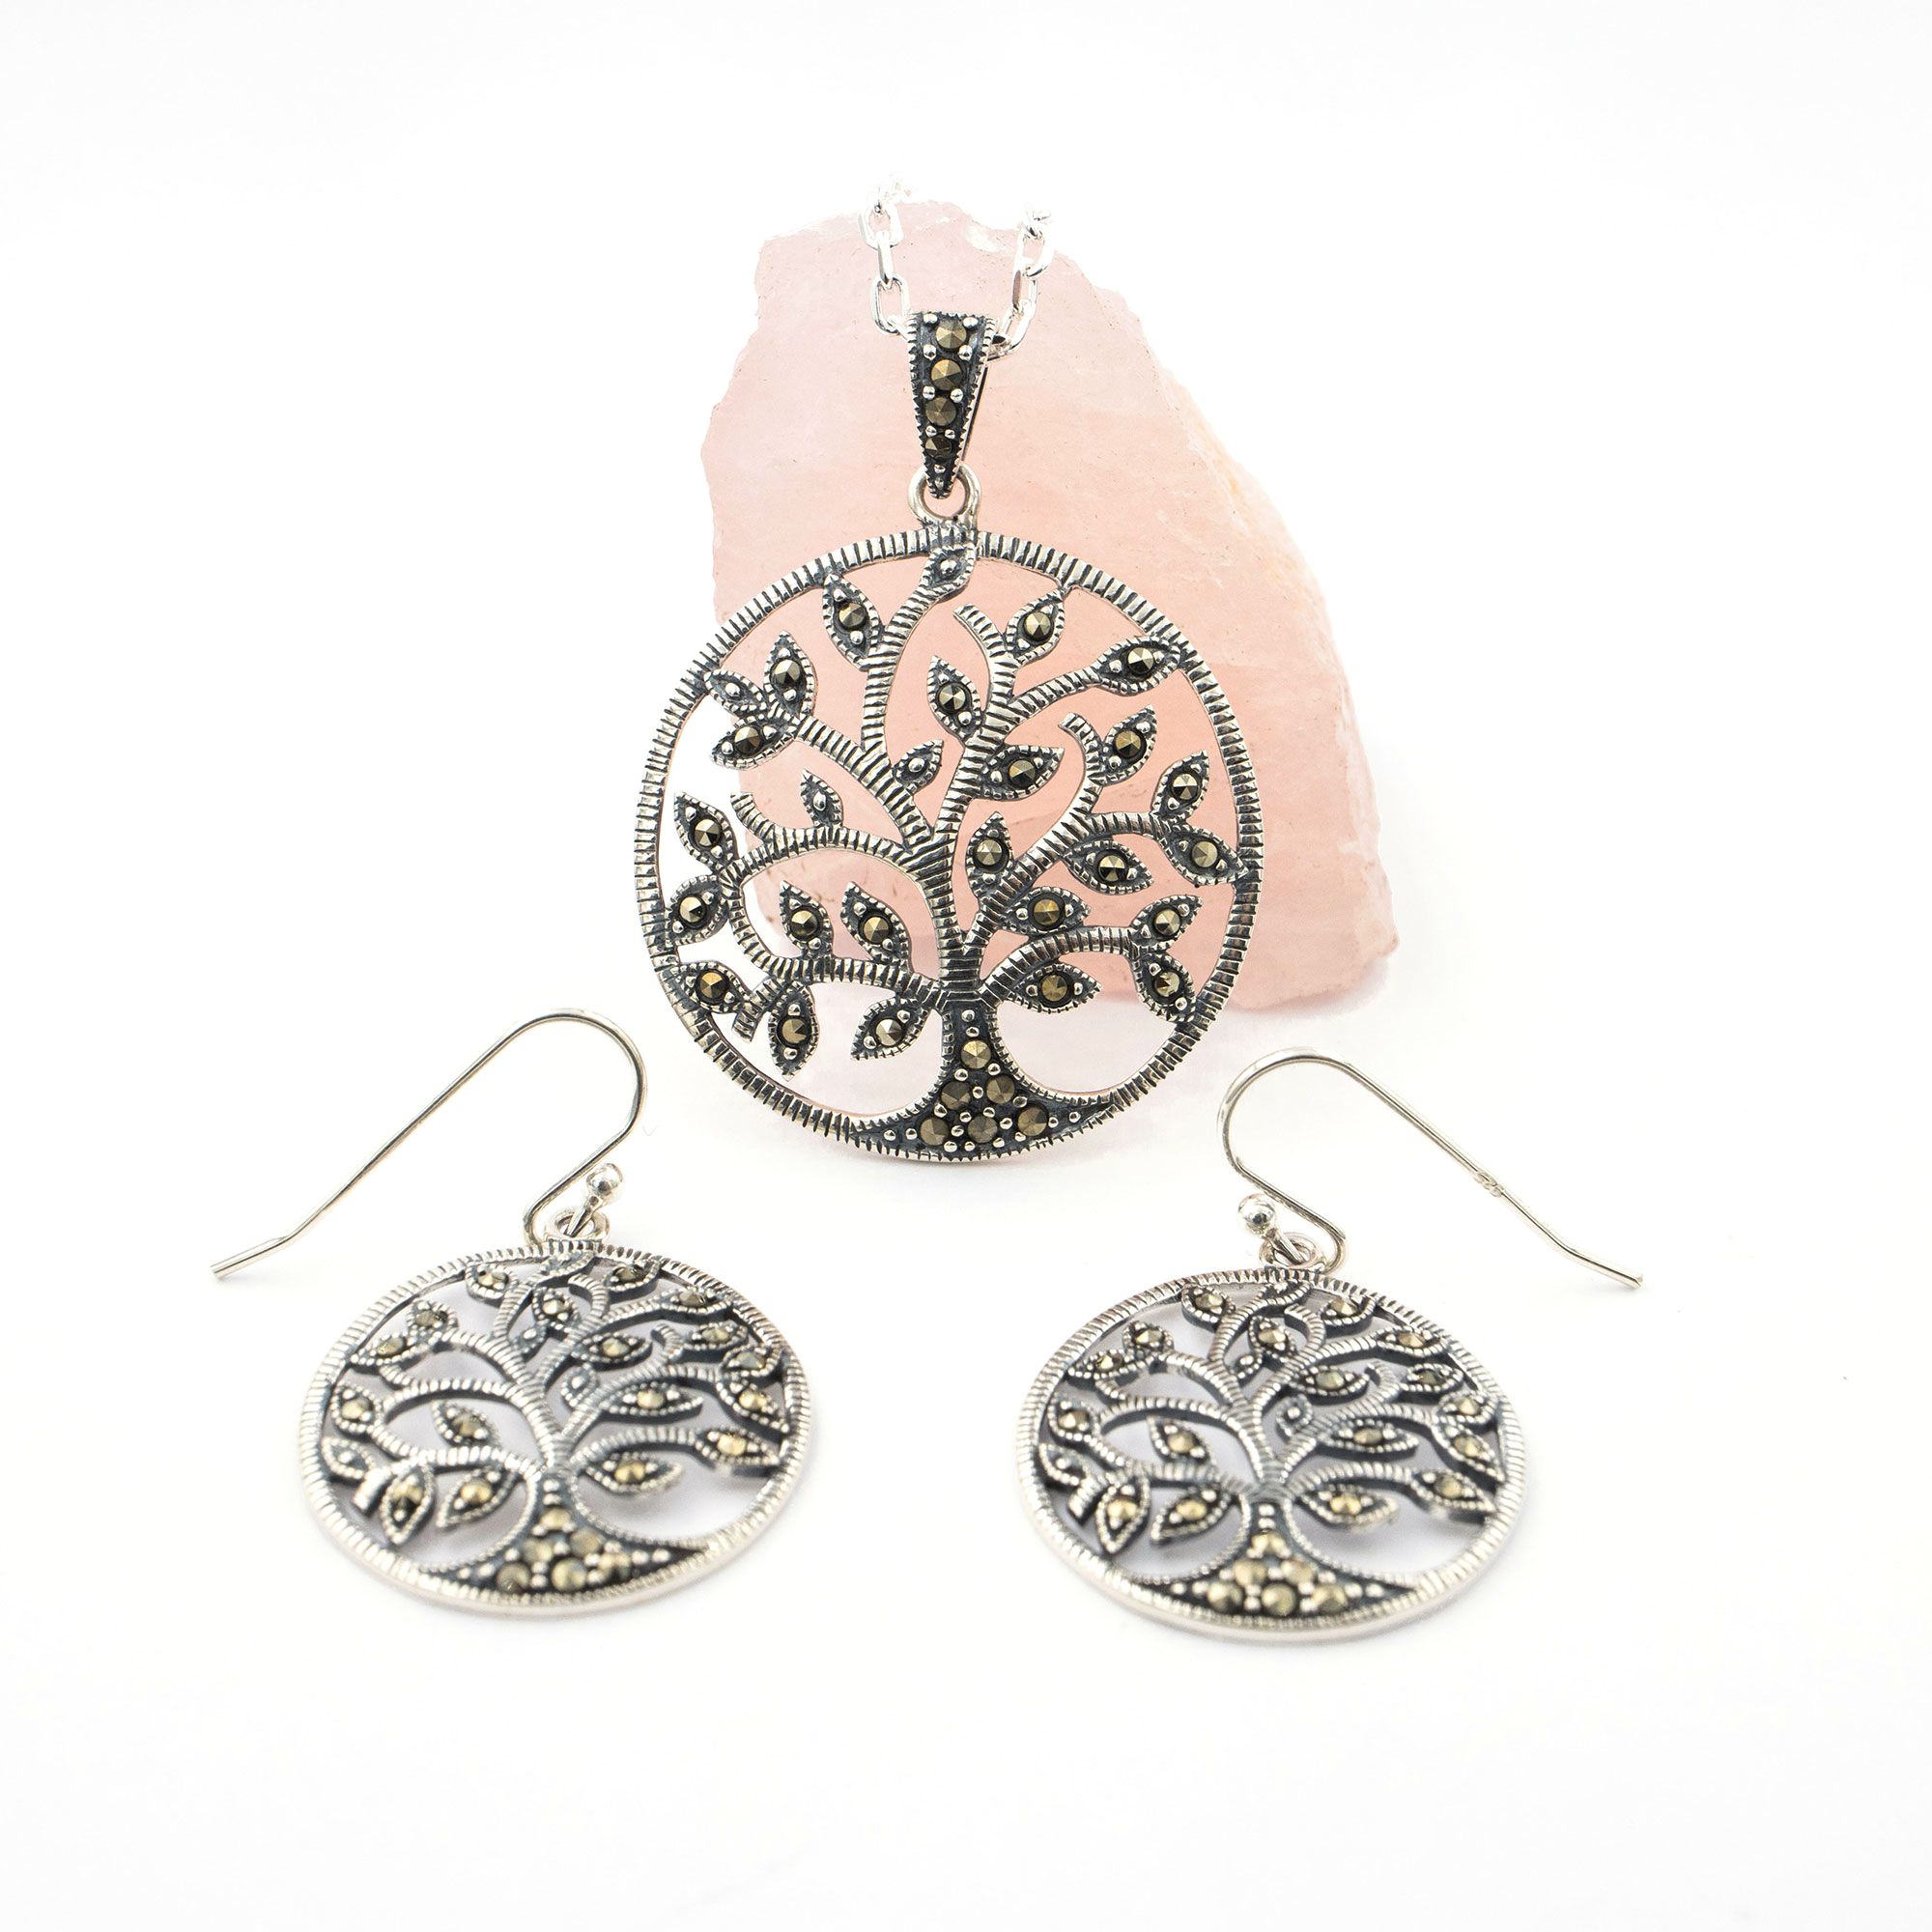 Detailed Metal Tree of Life Charms on Sterling Silver Earring Wires Boho Artisan Jewelry 